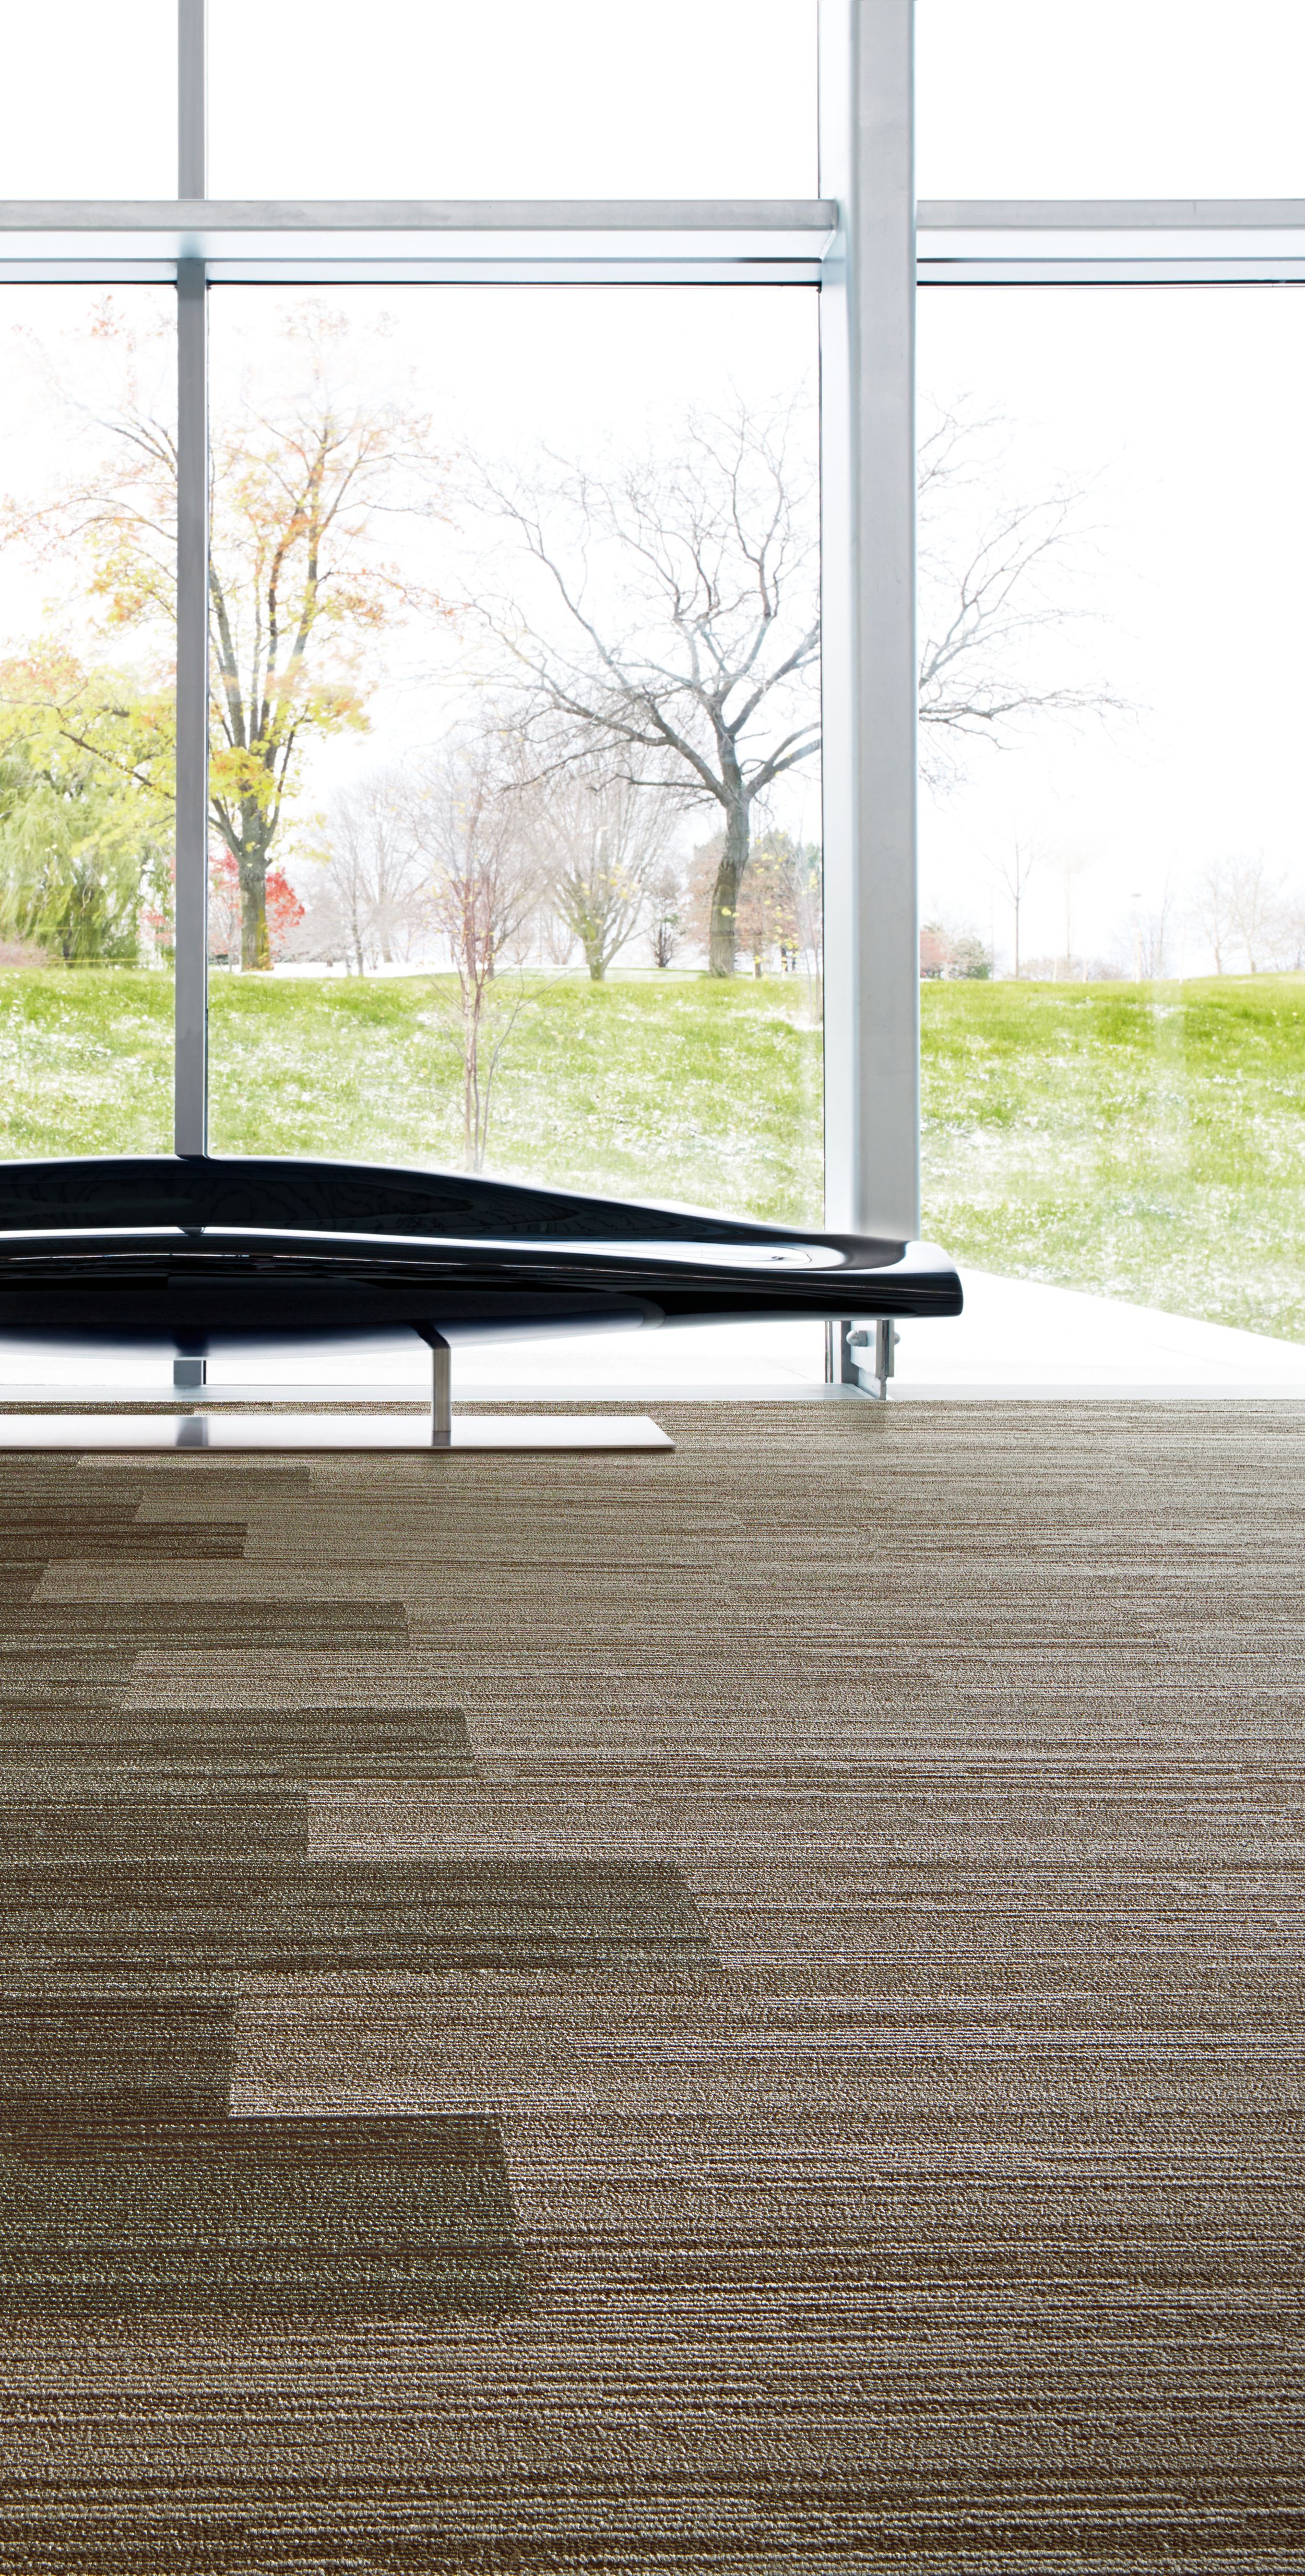 Interface Progression III plank carpet tile in room with seating area by window image number 5